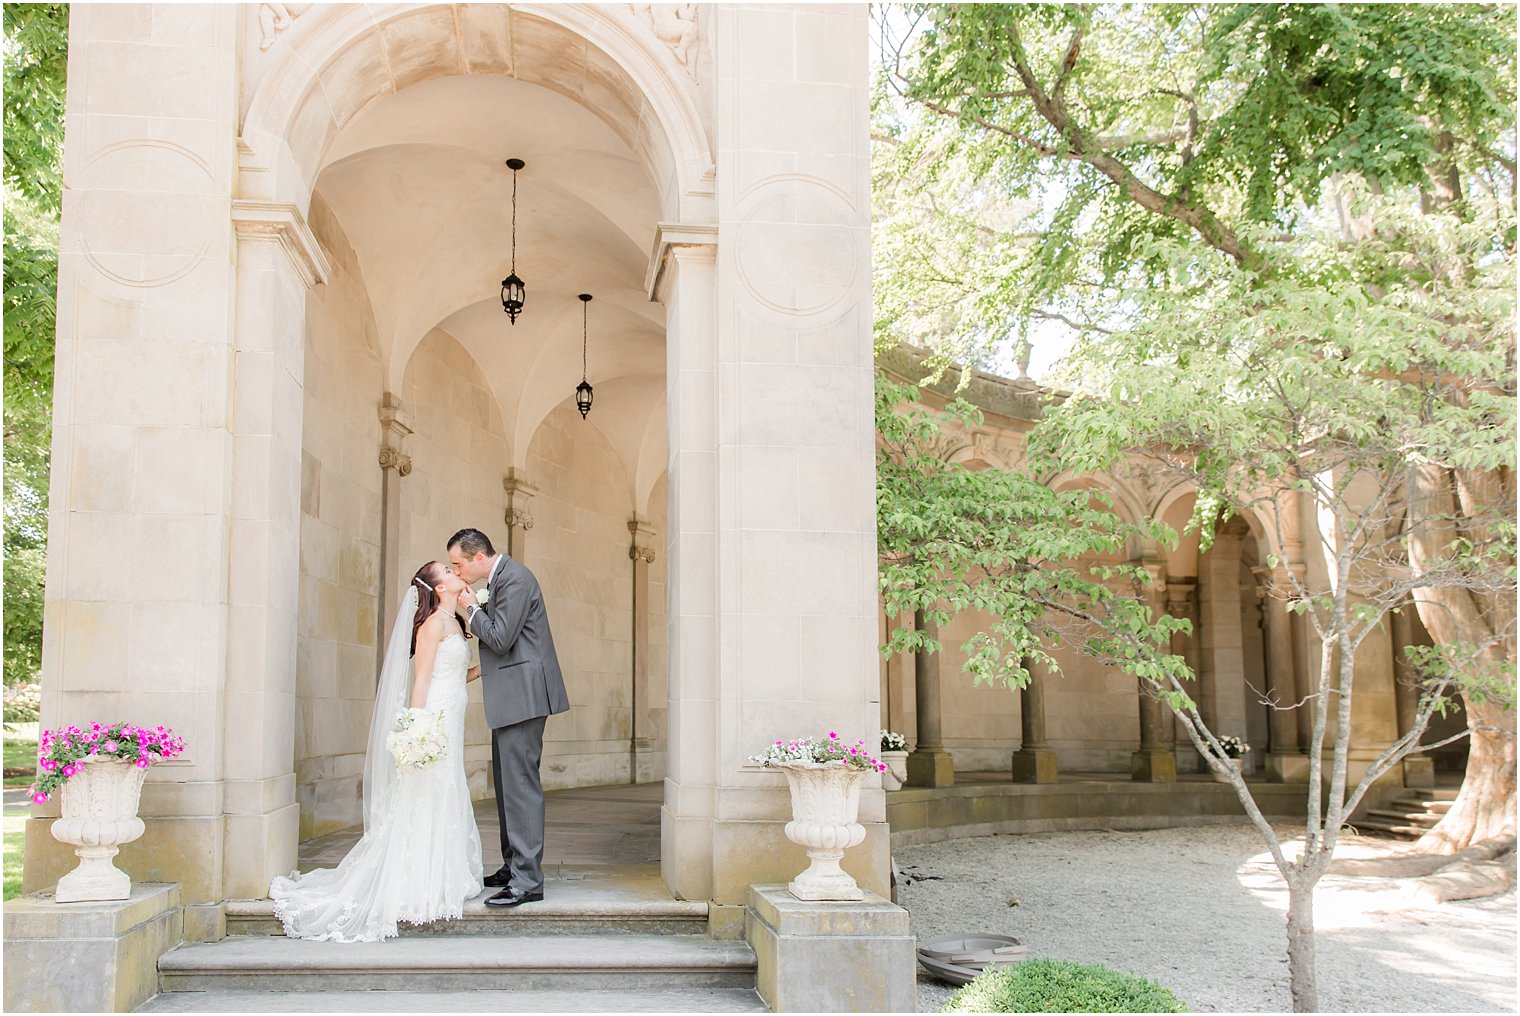 Bride and groom photos at Monmouth University